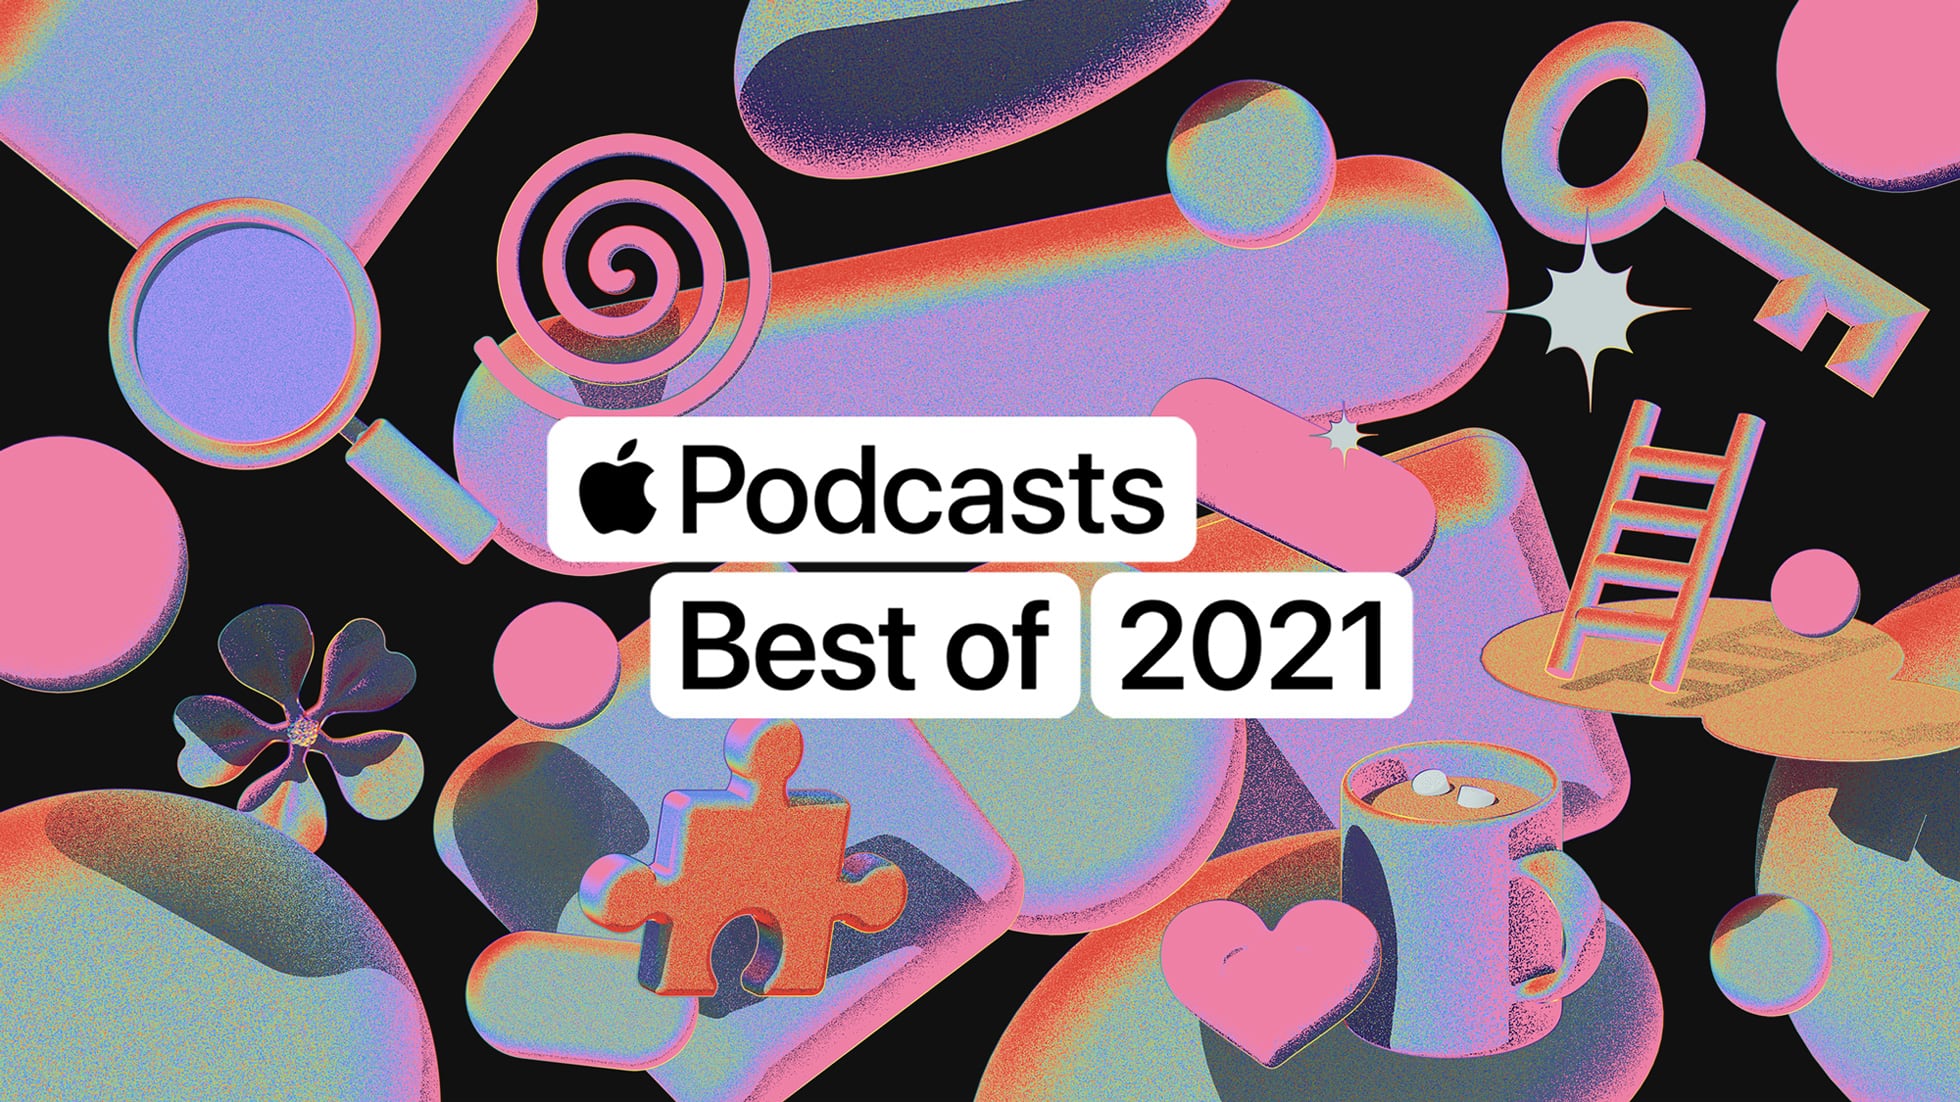 Apple's marketing image for the Best of 2021 charts on Apple Podcasts